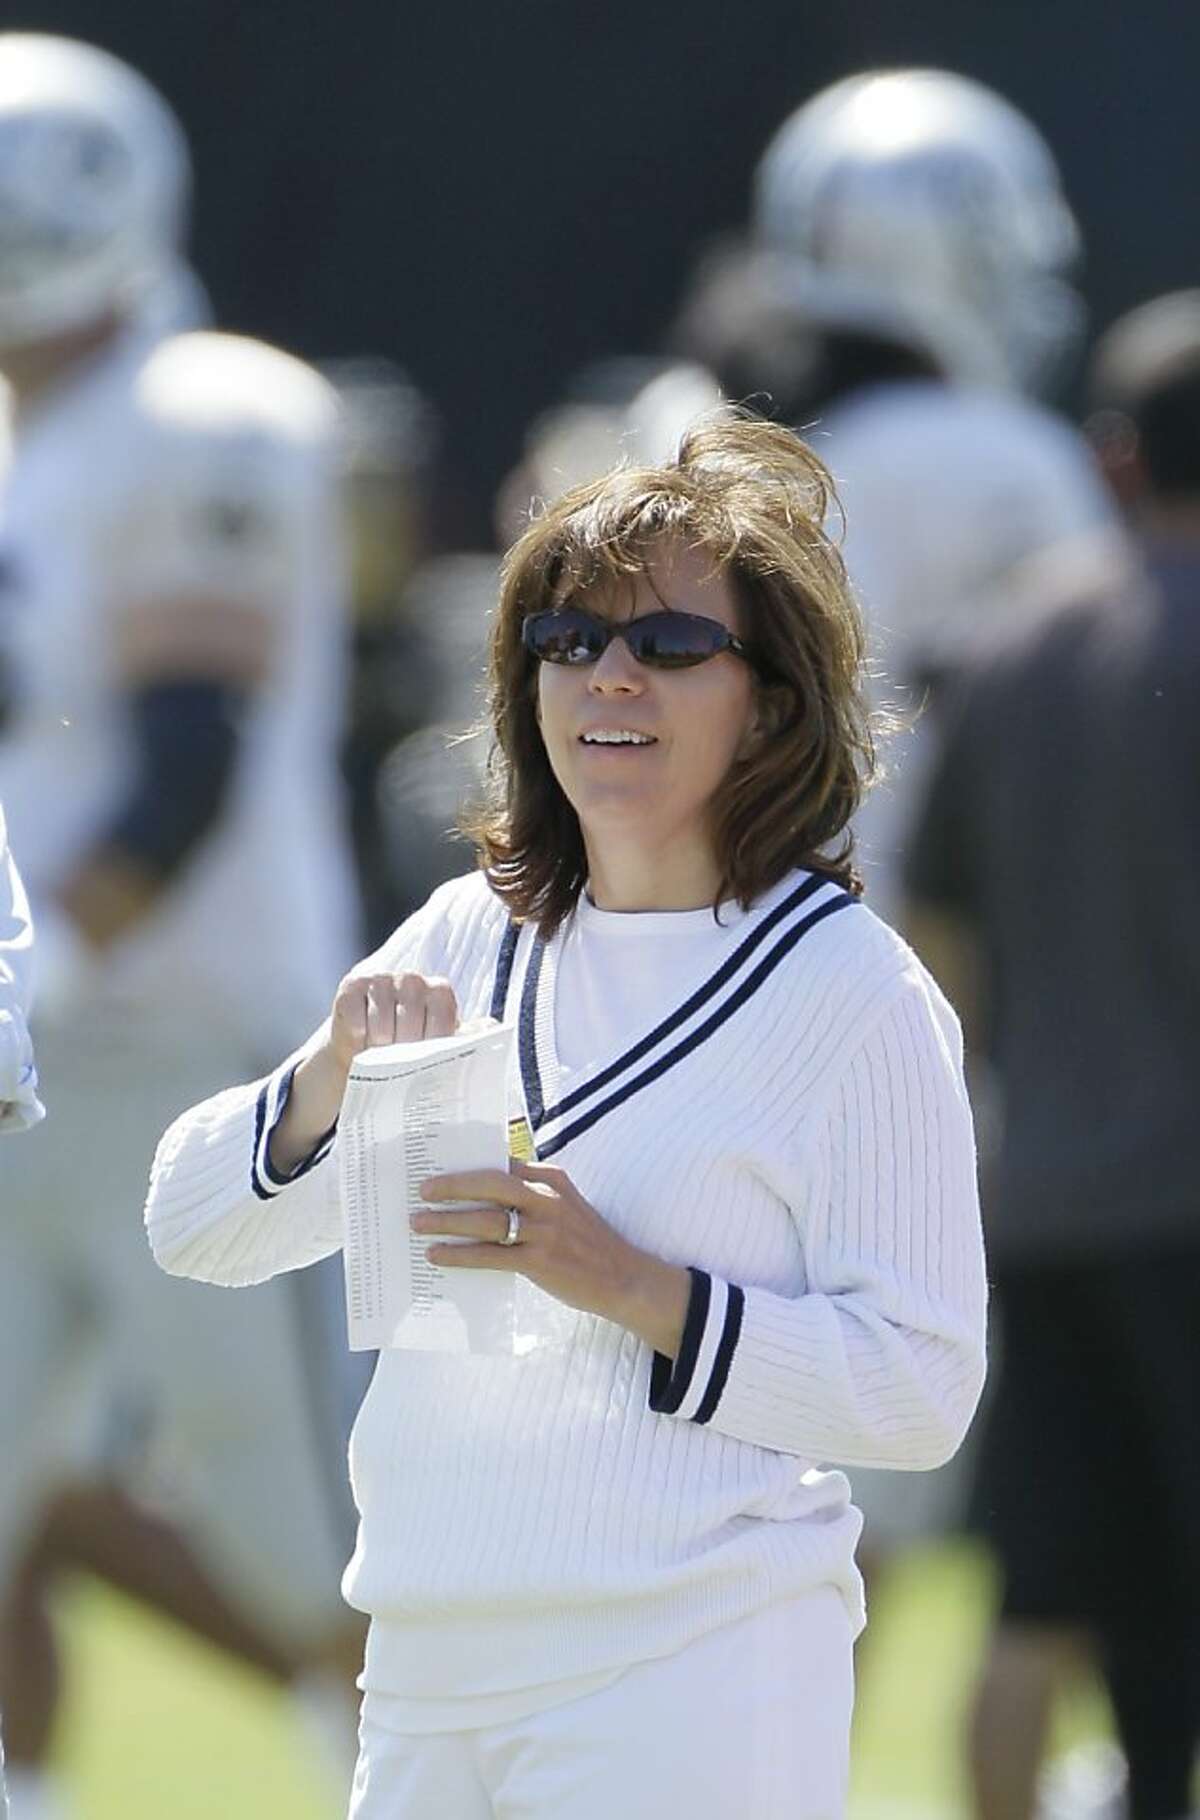 Oakland Raiders CEO Amy Trask during their NFL football training camp in Napa, Calif.,Thursday, Aug. 4, 2011. (AP Photo/Eric Risberg)